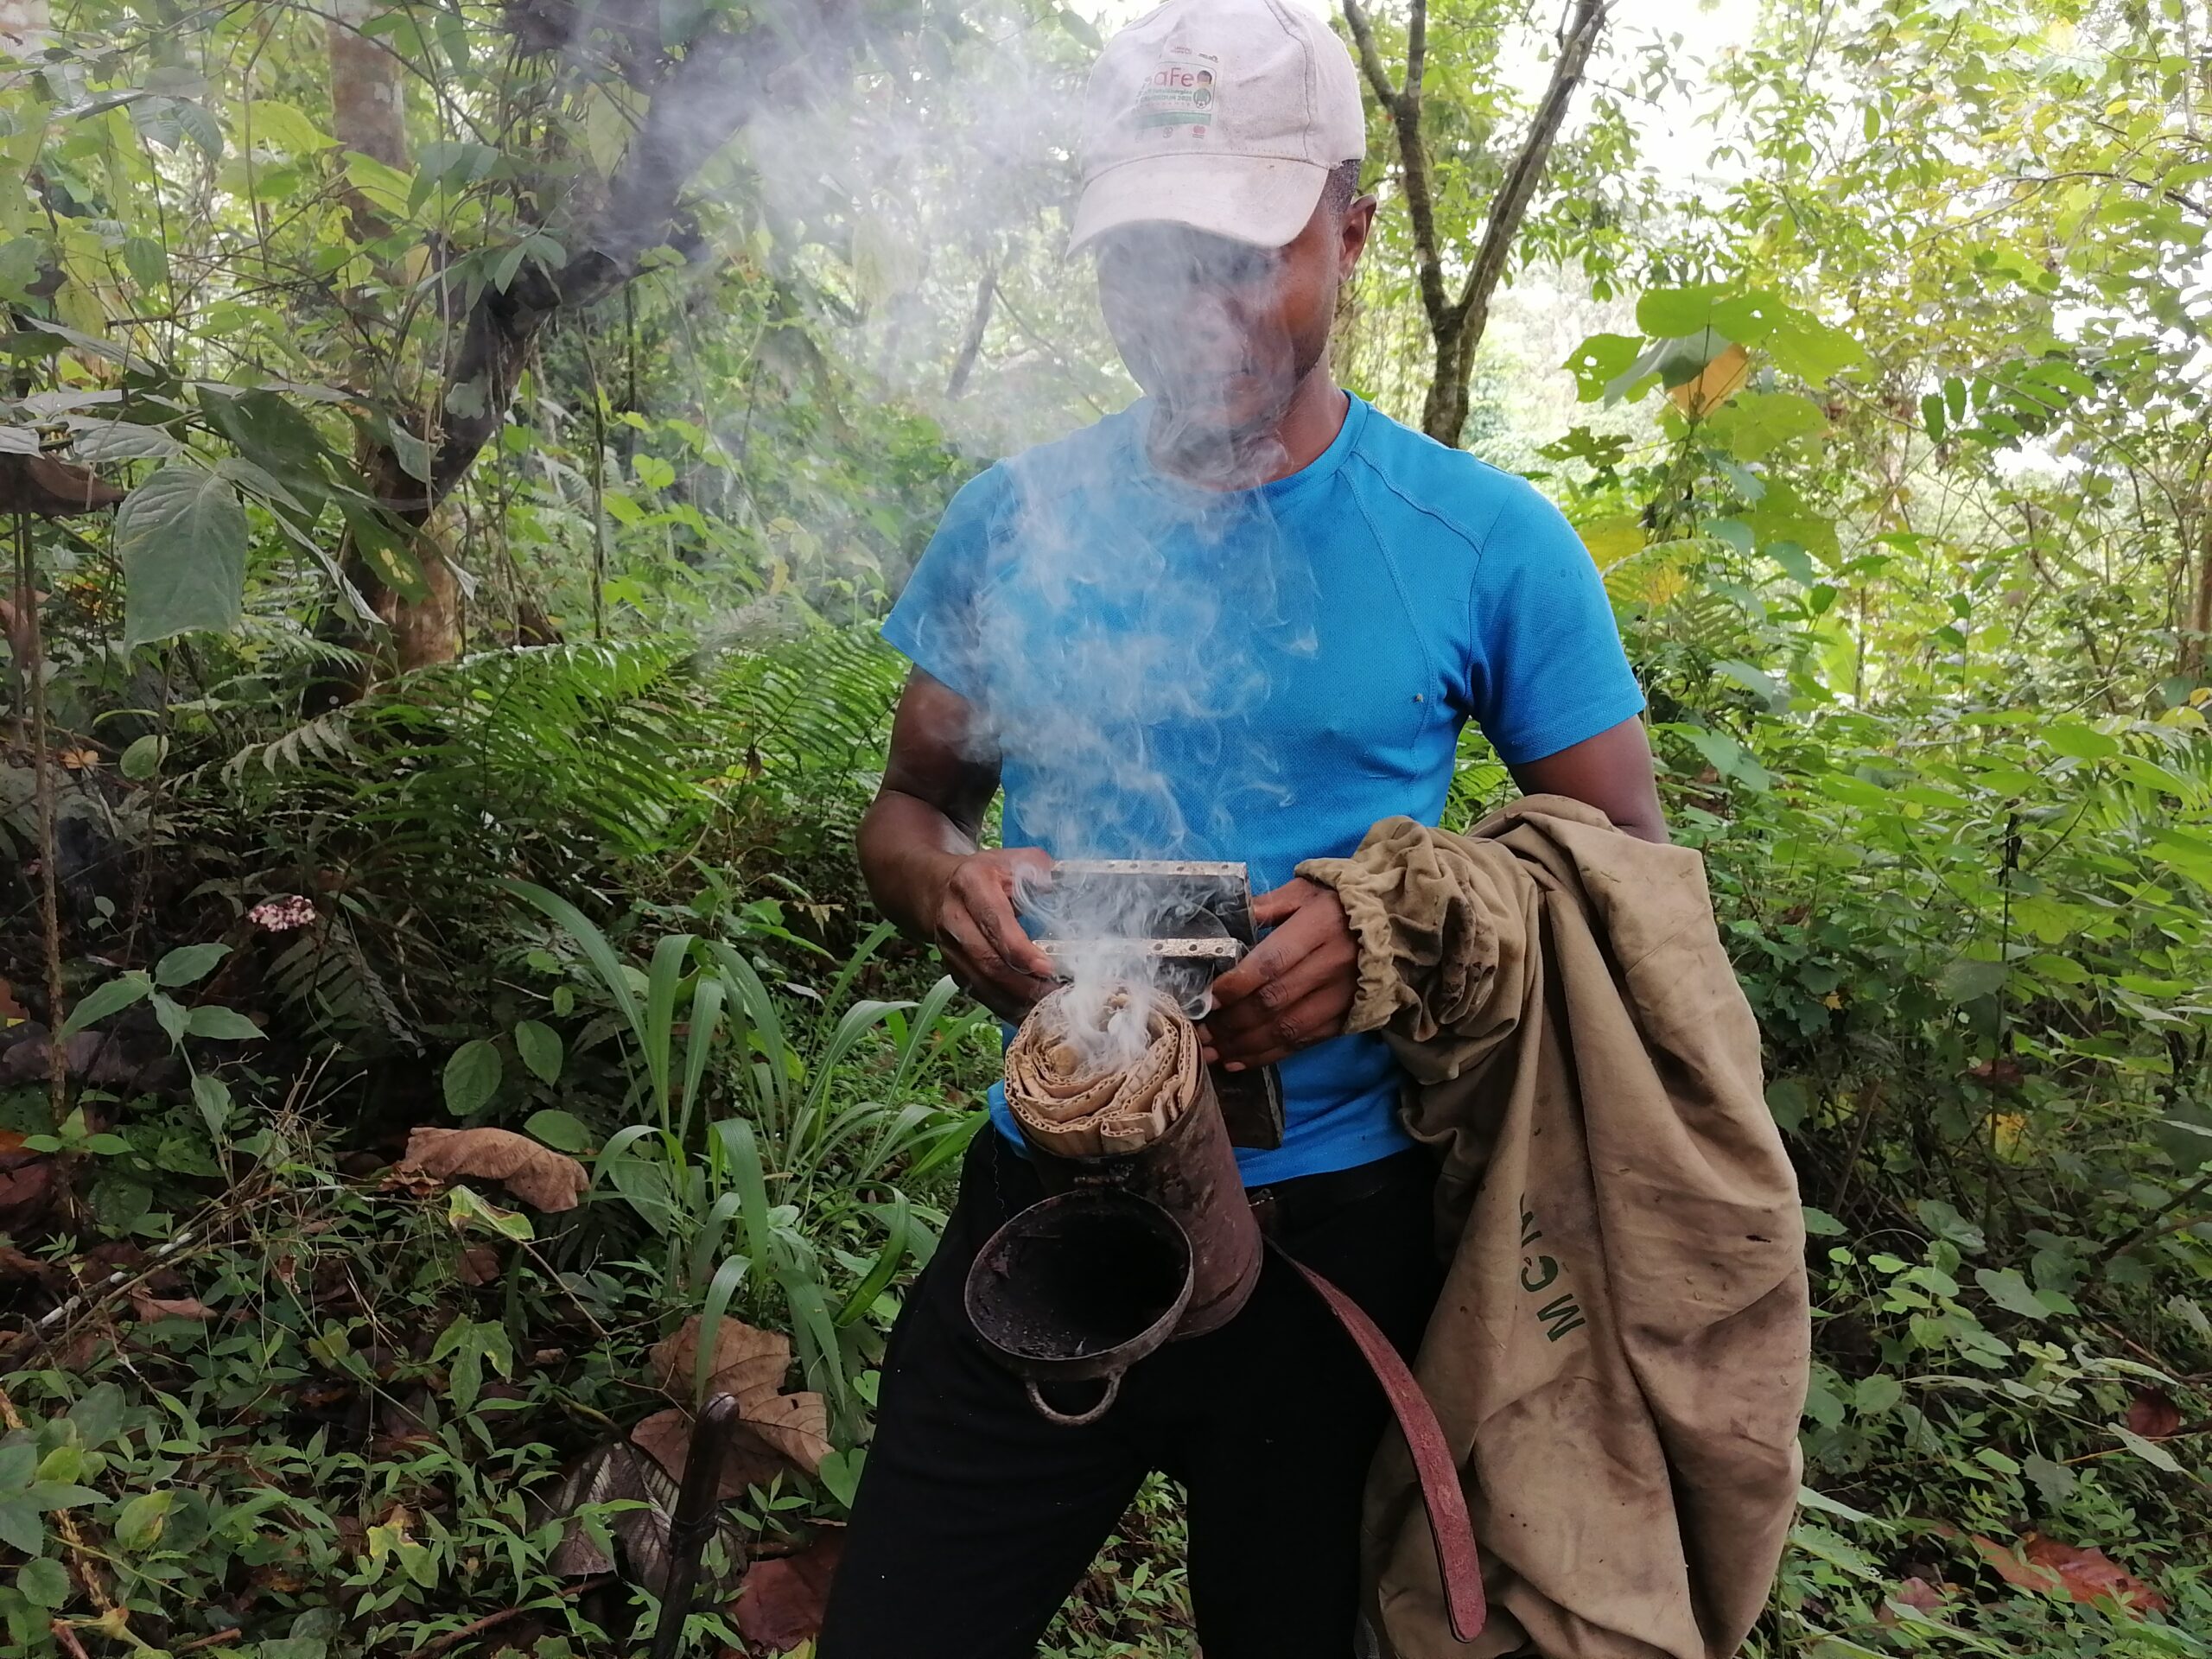 Evambe Thompson, an apiculturist in Cameroon, presses on a smoker to calm his bees. 